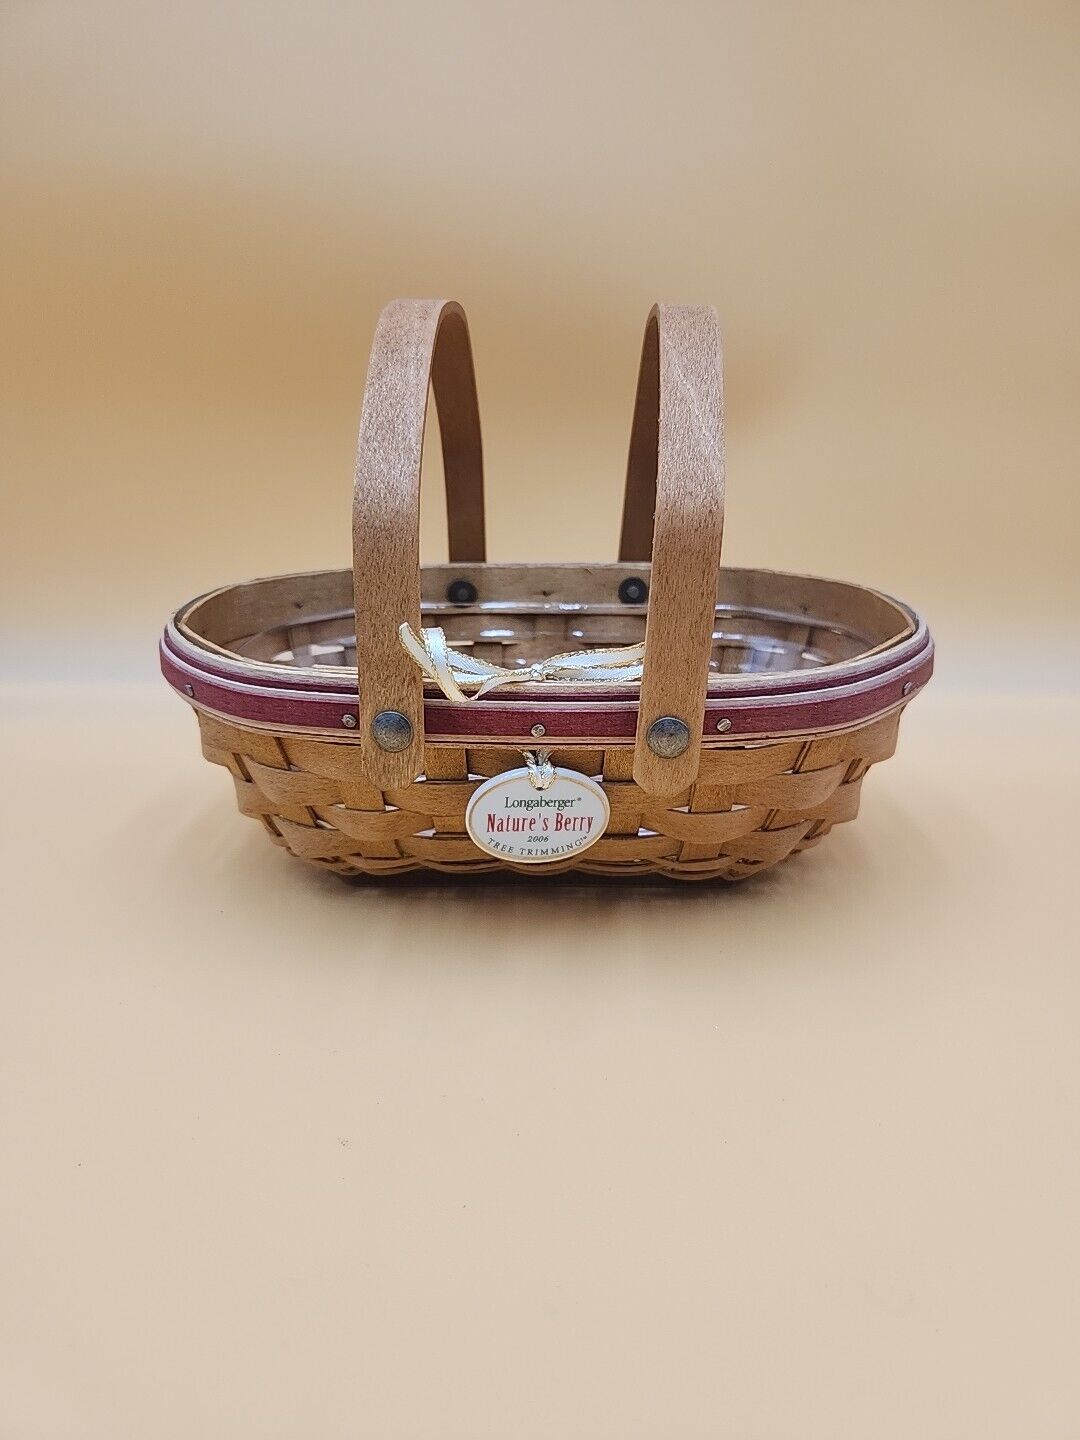 2006 Longaberger Tree Trimming Natures Berry Basket with Tie-On  and  Protector